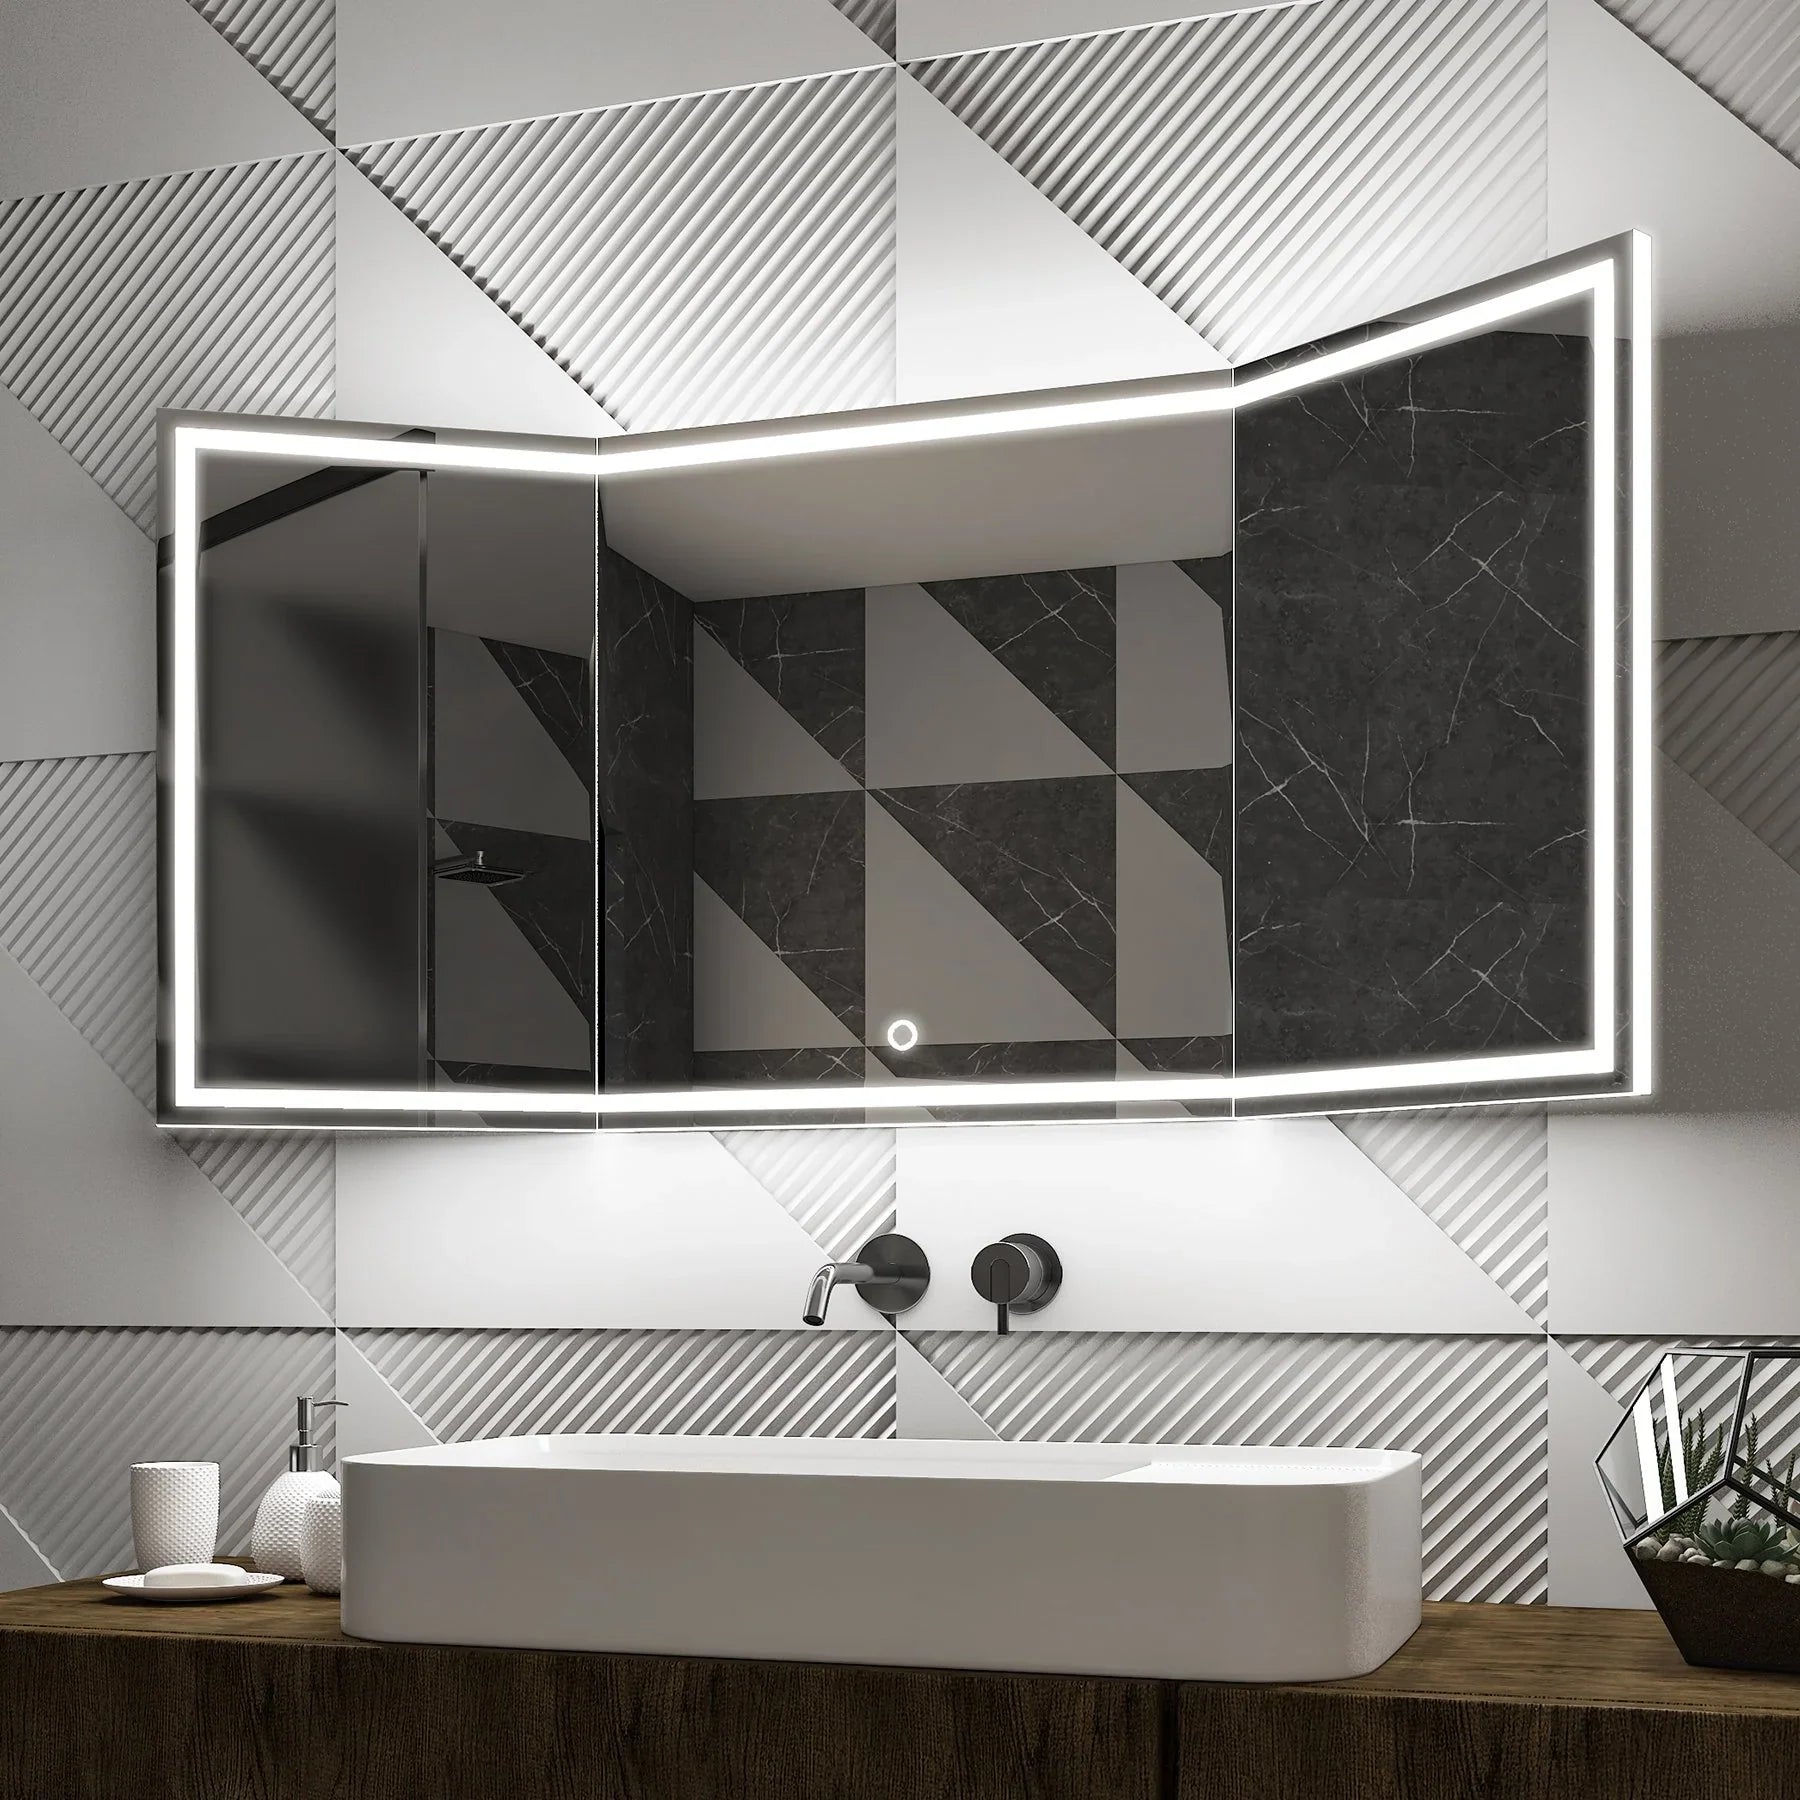 55.1 x 25.6 Inch Backlit LED Lighted Bathroom Mirror with Thin Plexiglass Edge, CCT Remembrance, Touch Sensor Switch